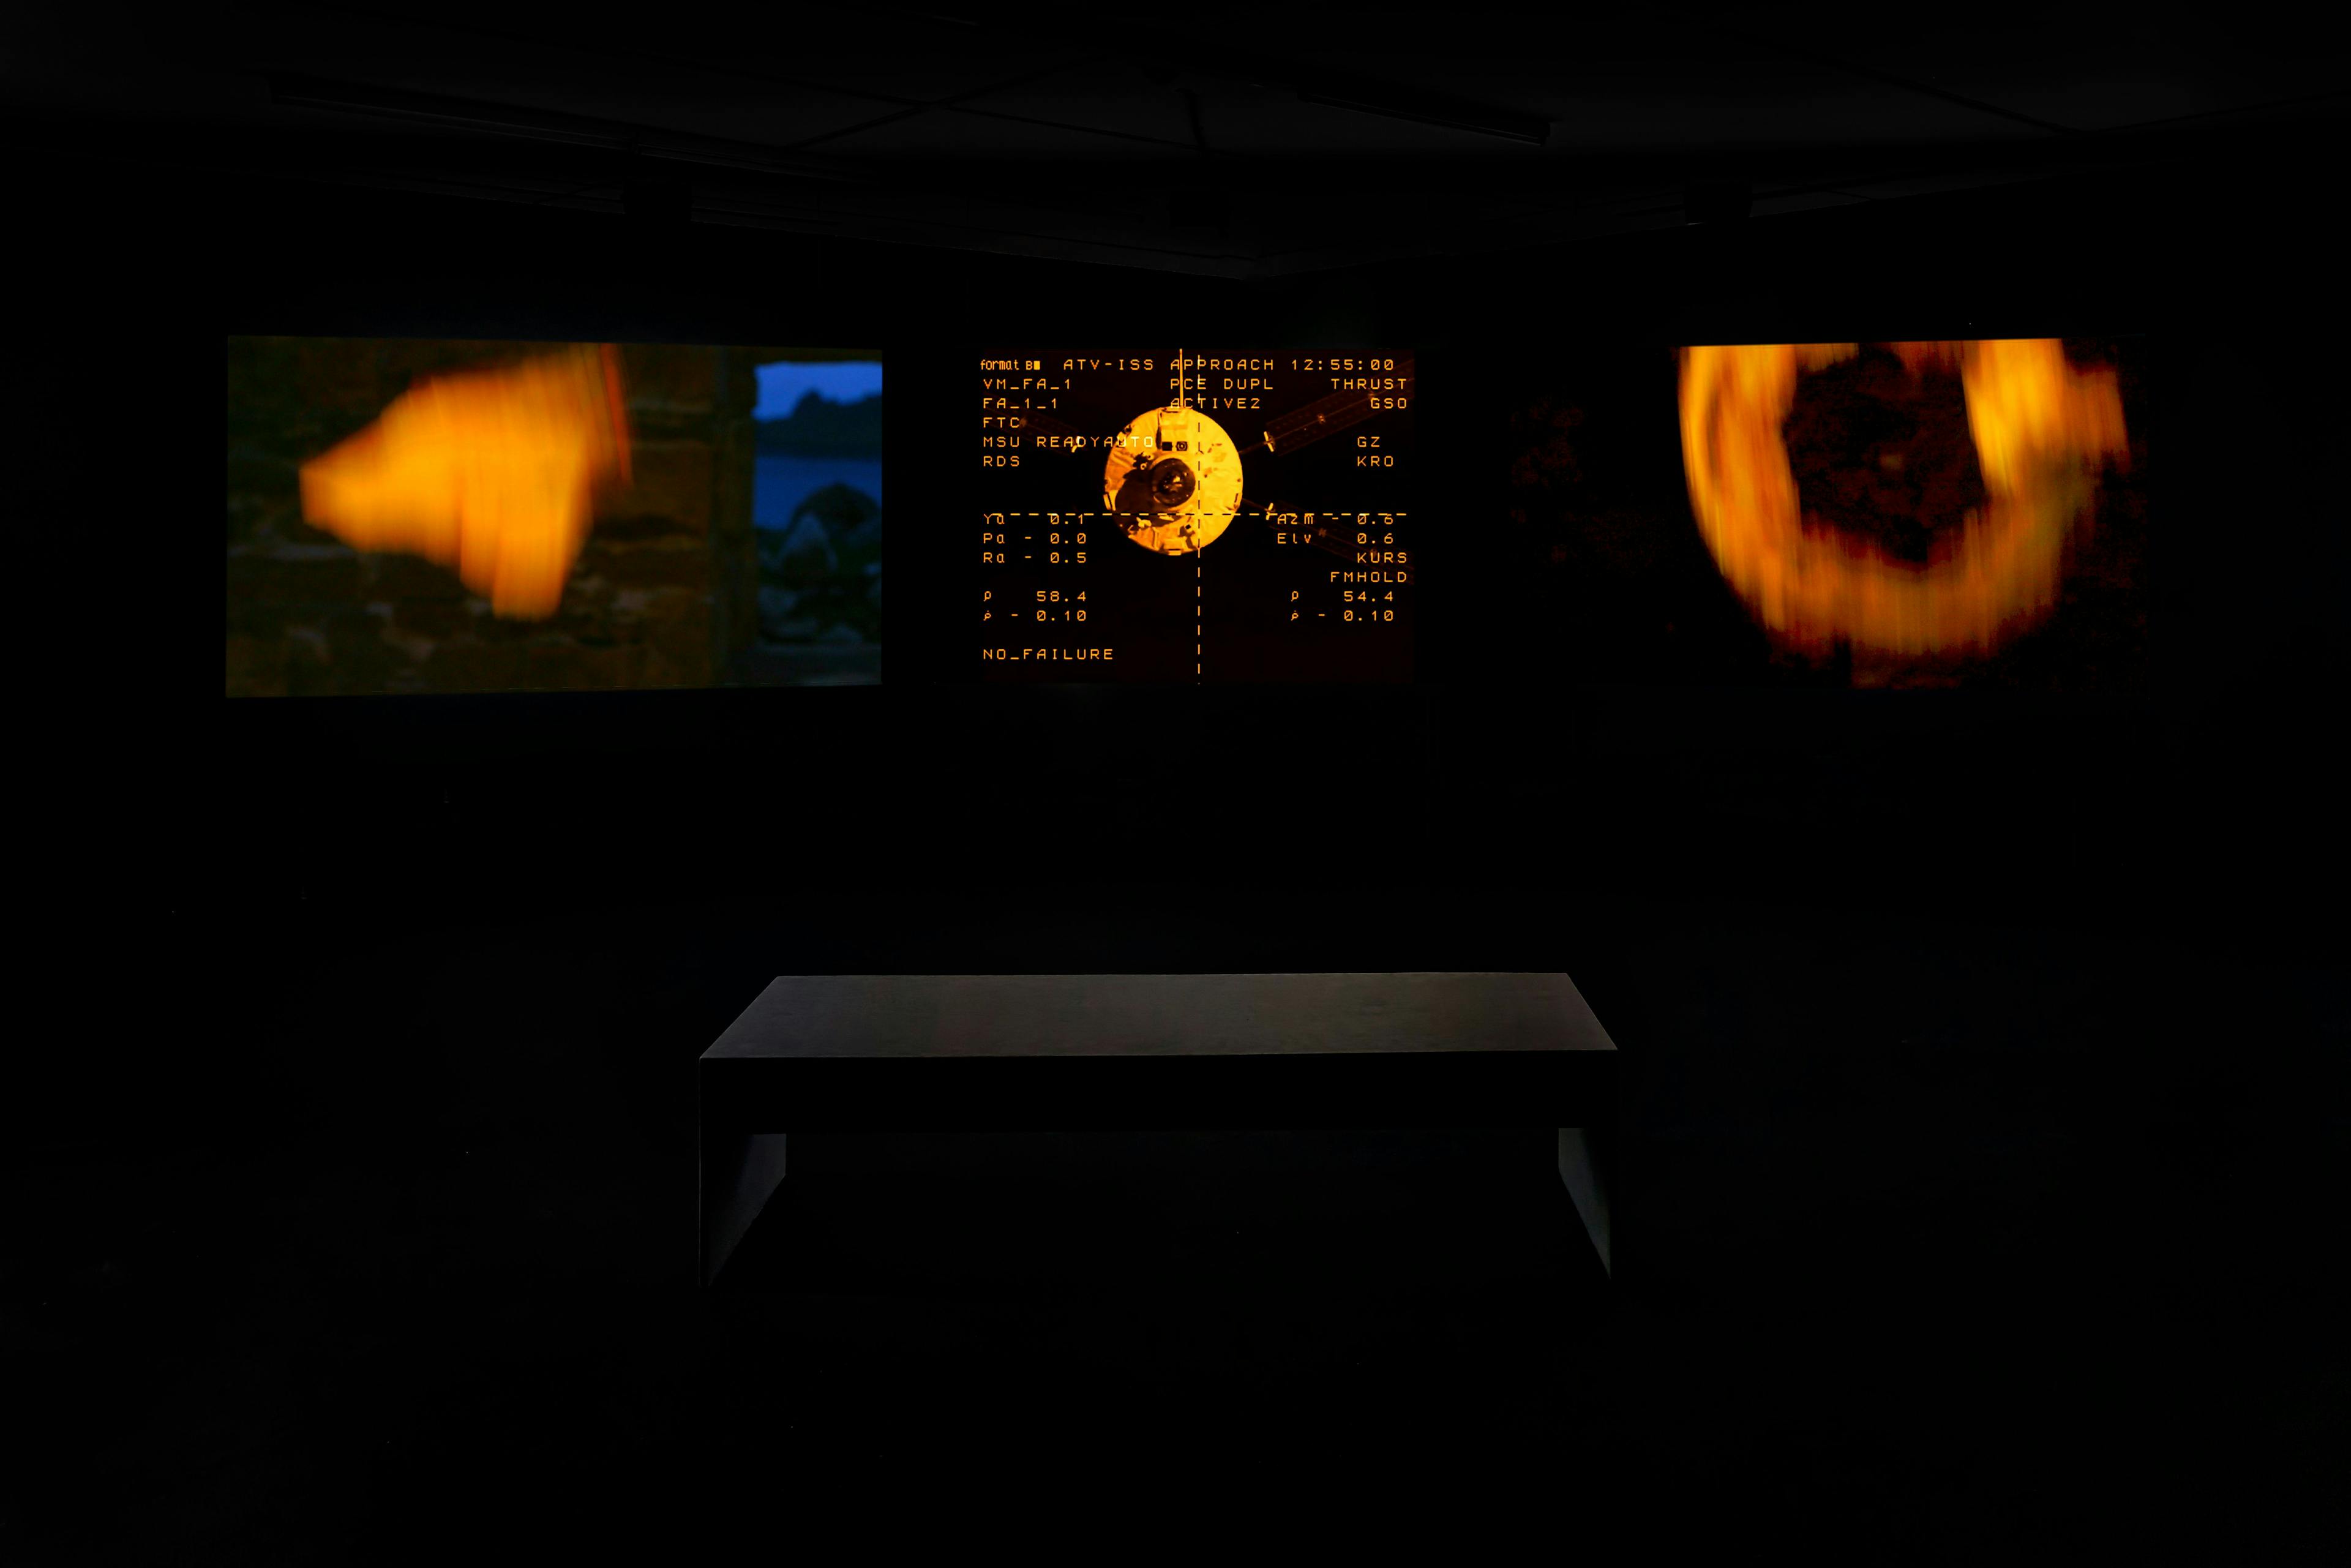 Shona Illingworth, Lesions in the Landscape, 2015. Three-channel video and multi-channel sound installation, 35 min. Courtesy the artist. Installation view: Topologies of Air, The Power Plant, 2022. Photo: Toni Hafkenscheid